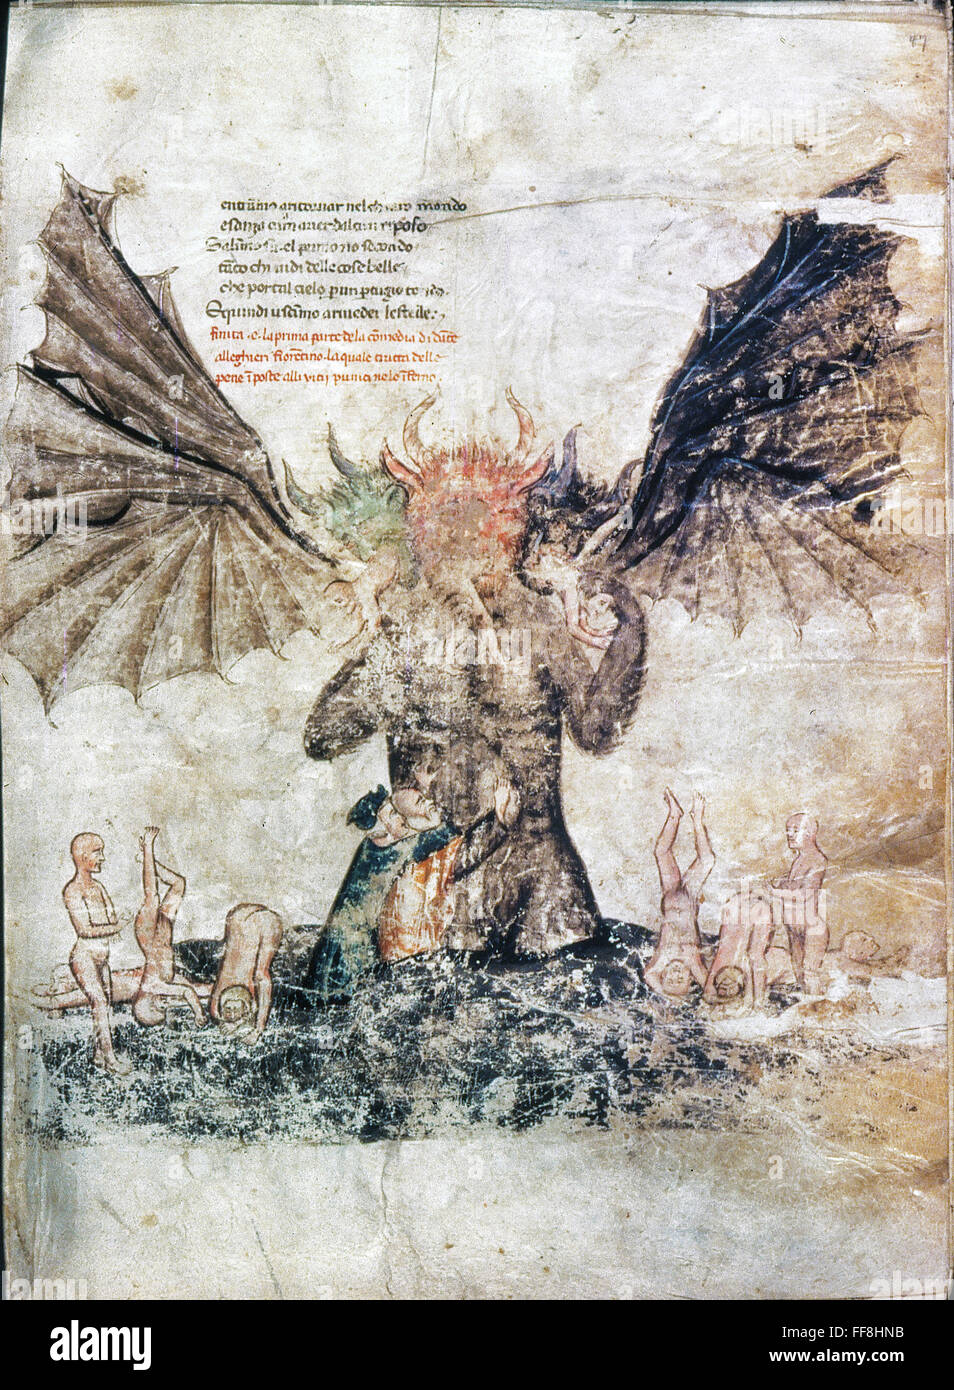 DANTE'S INFERNO: LUCIFER. /nDante and Virgil climbing down Lucifer:  illumination from a late 14th century ms. illumination of the Divine Comedy  Stock Photo - Alamy